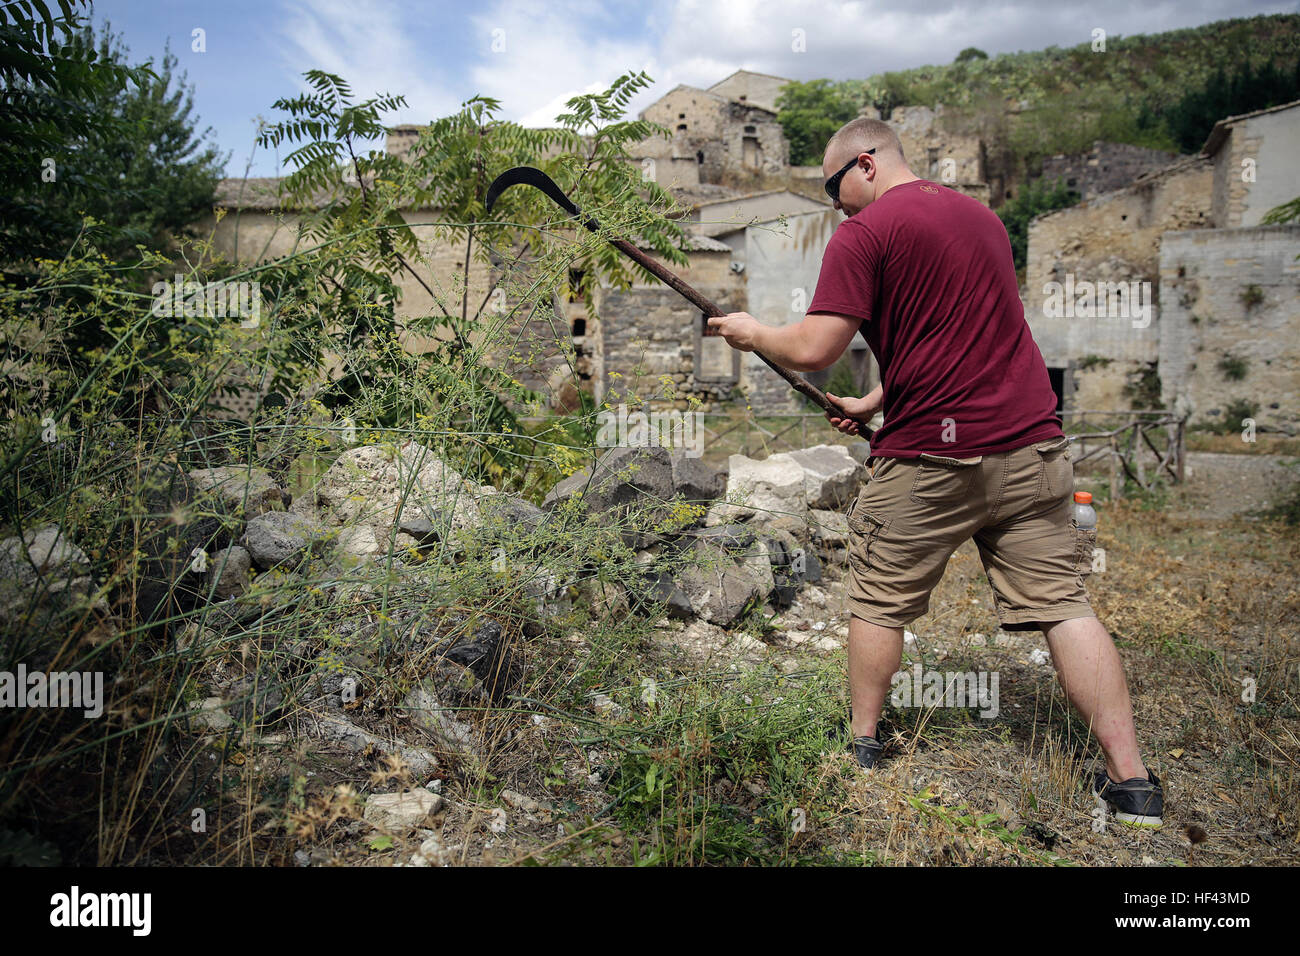 RPSA Alexander Varner, religious personnel with Special Purpose Marine Air-Ground Task Force Crisis Response-Africa, cuts down weeds and overgrowth with a sickle in Vizzini, Sicily, Sept. 7, 2016.  Marines volunteered to clean up a local historic site and build fences during a community relations project.  (U.S. Marine Corps photo by Cpl. Alexander Mitchell/released) Marines restore historic Italian site 160907-M-ML847-531 Stock Photo